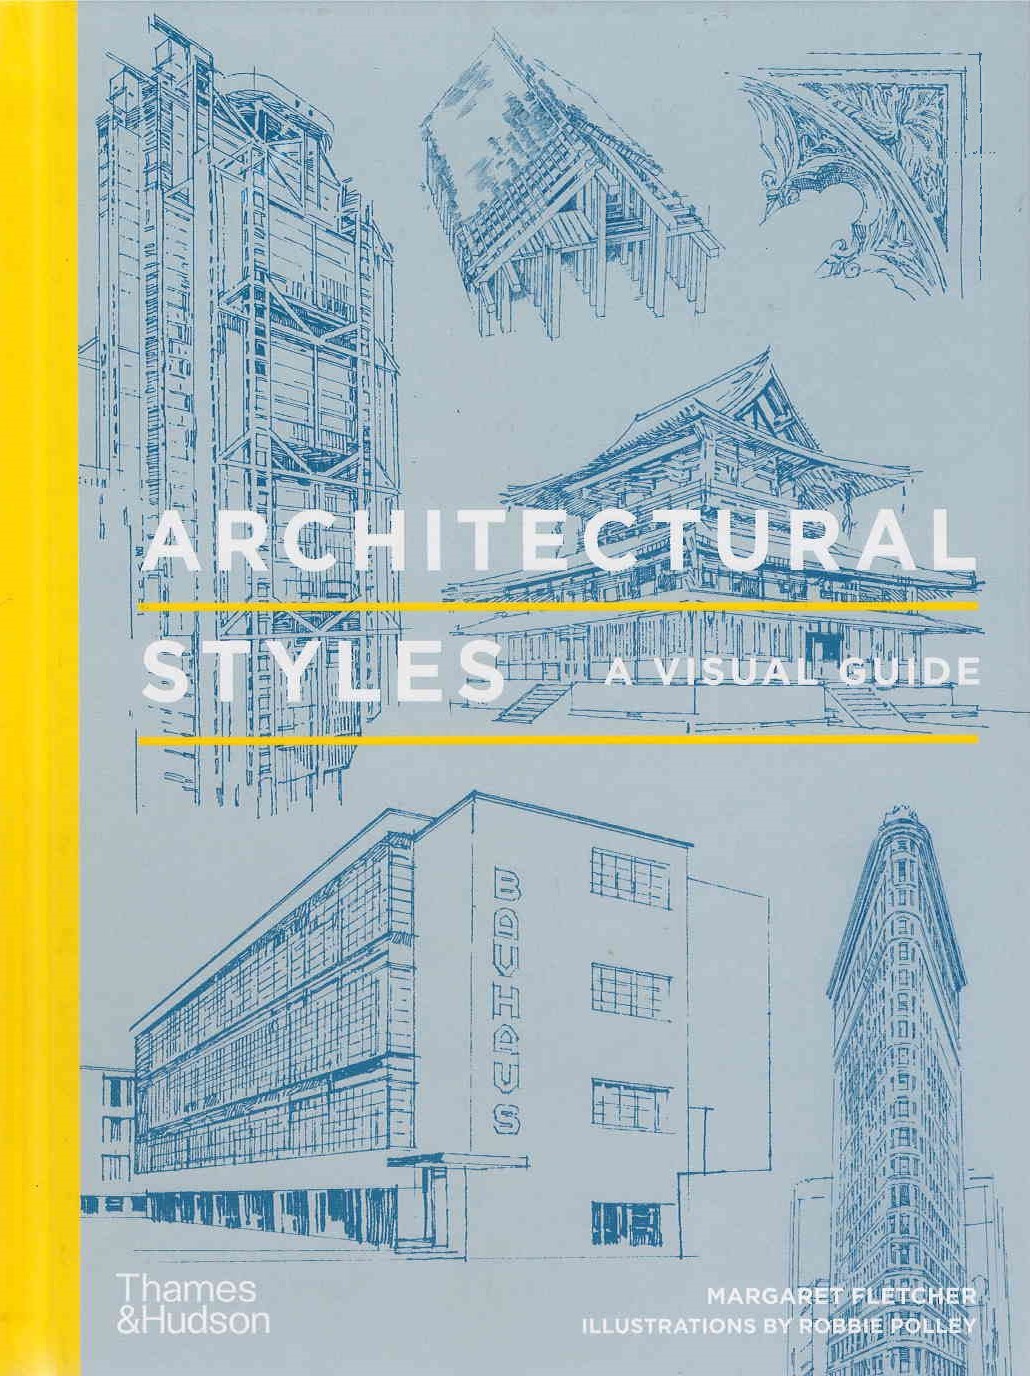 Architectural styles : a visual guide